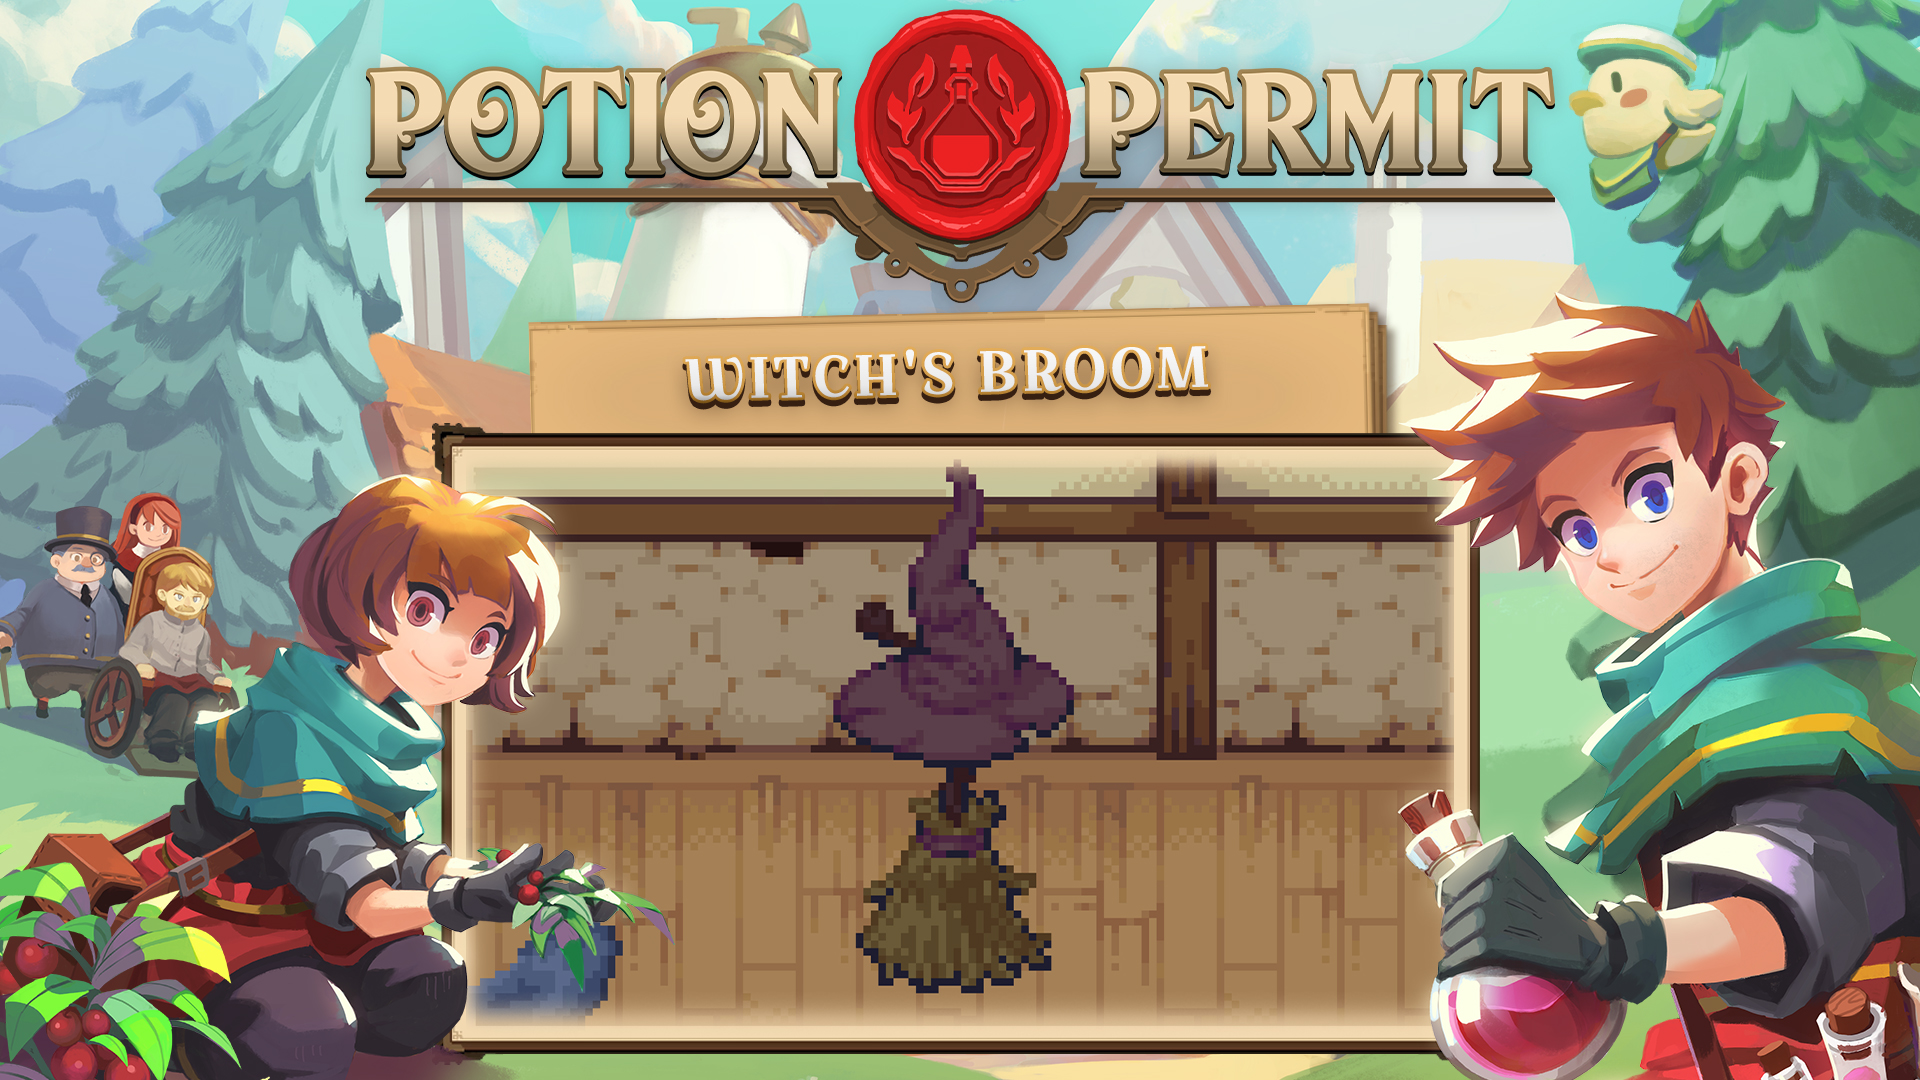 Potion Permit - Witch's Broom